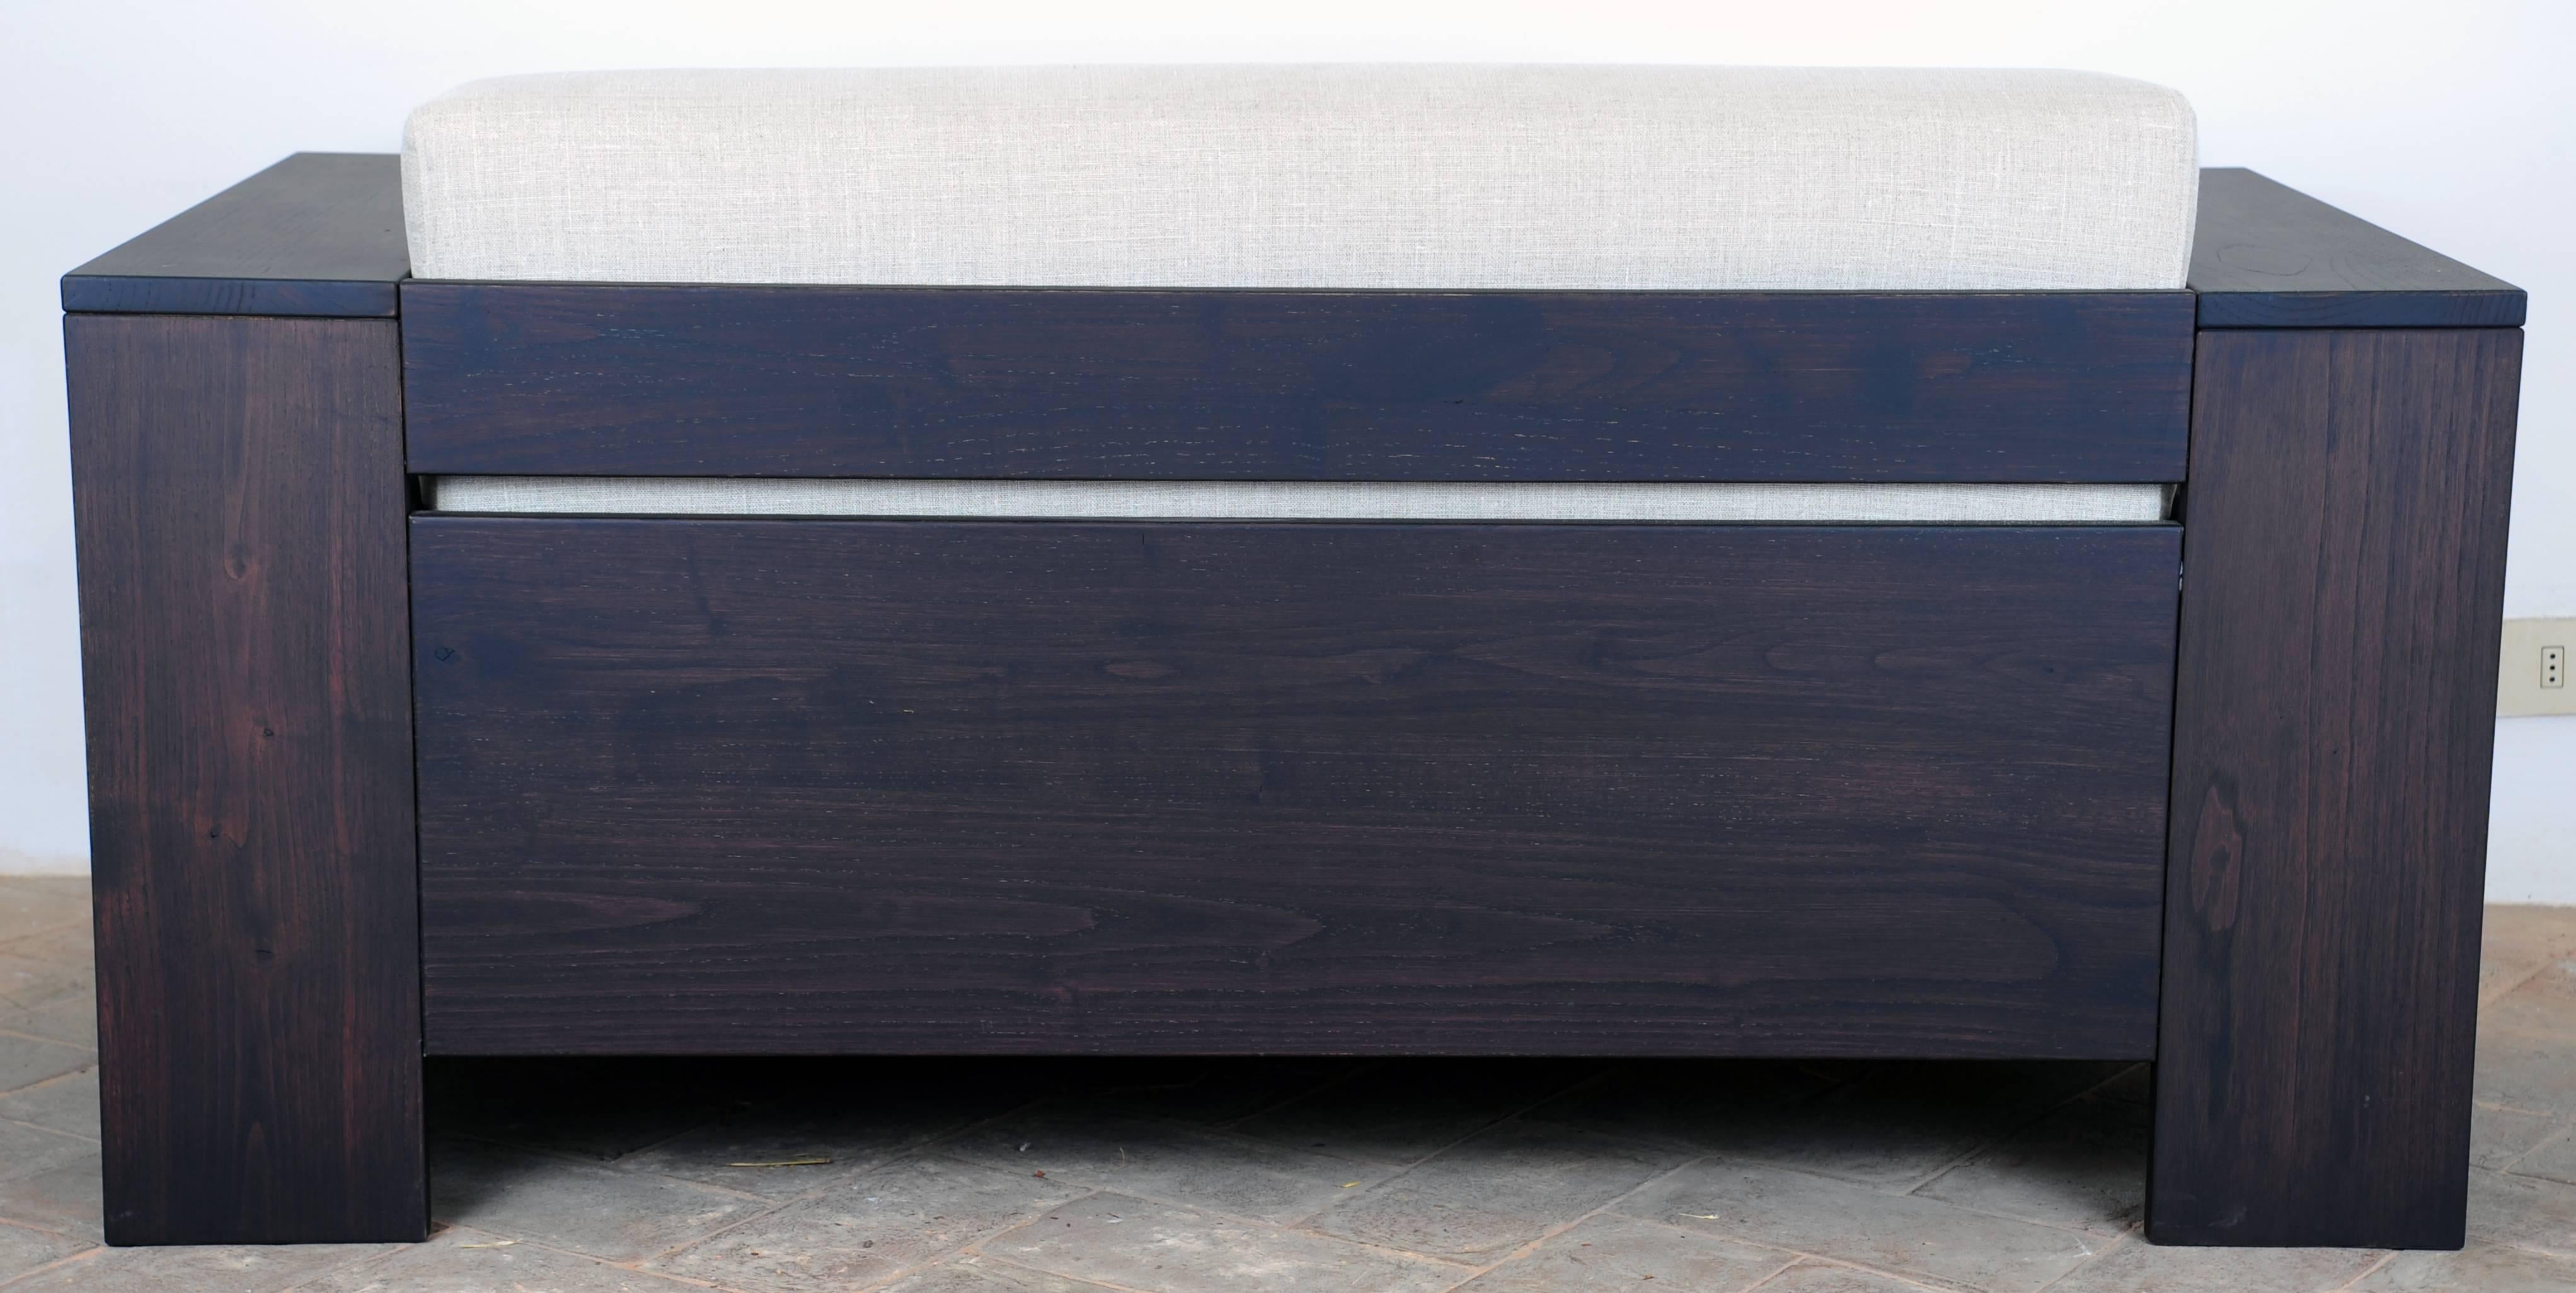 Hand-Crafted Modern Solid Chestnut Wood Sofa by Michelangeli, Italy For Sale